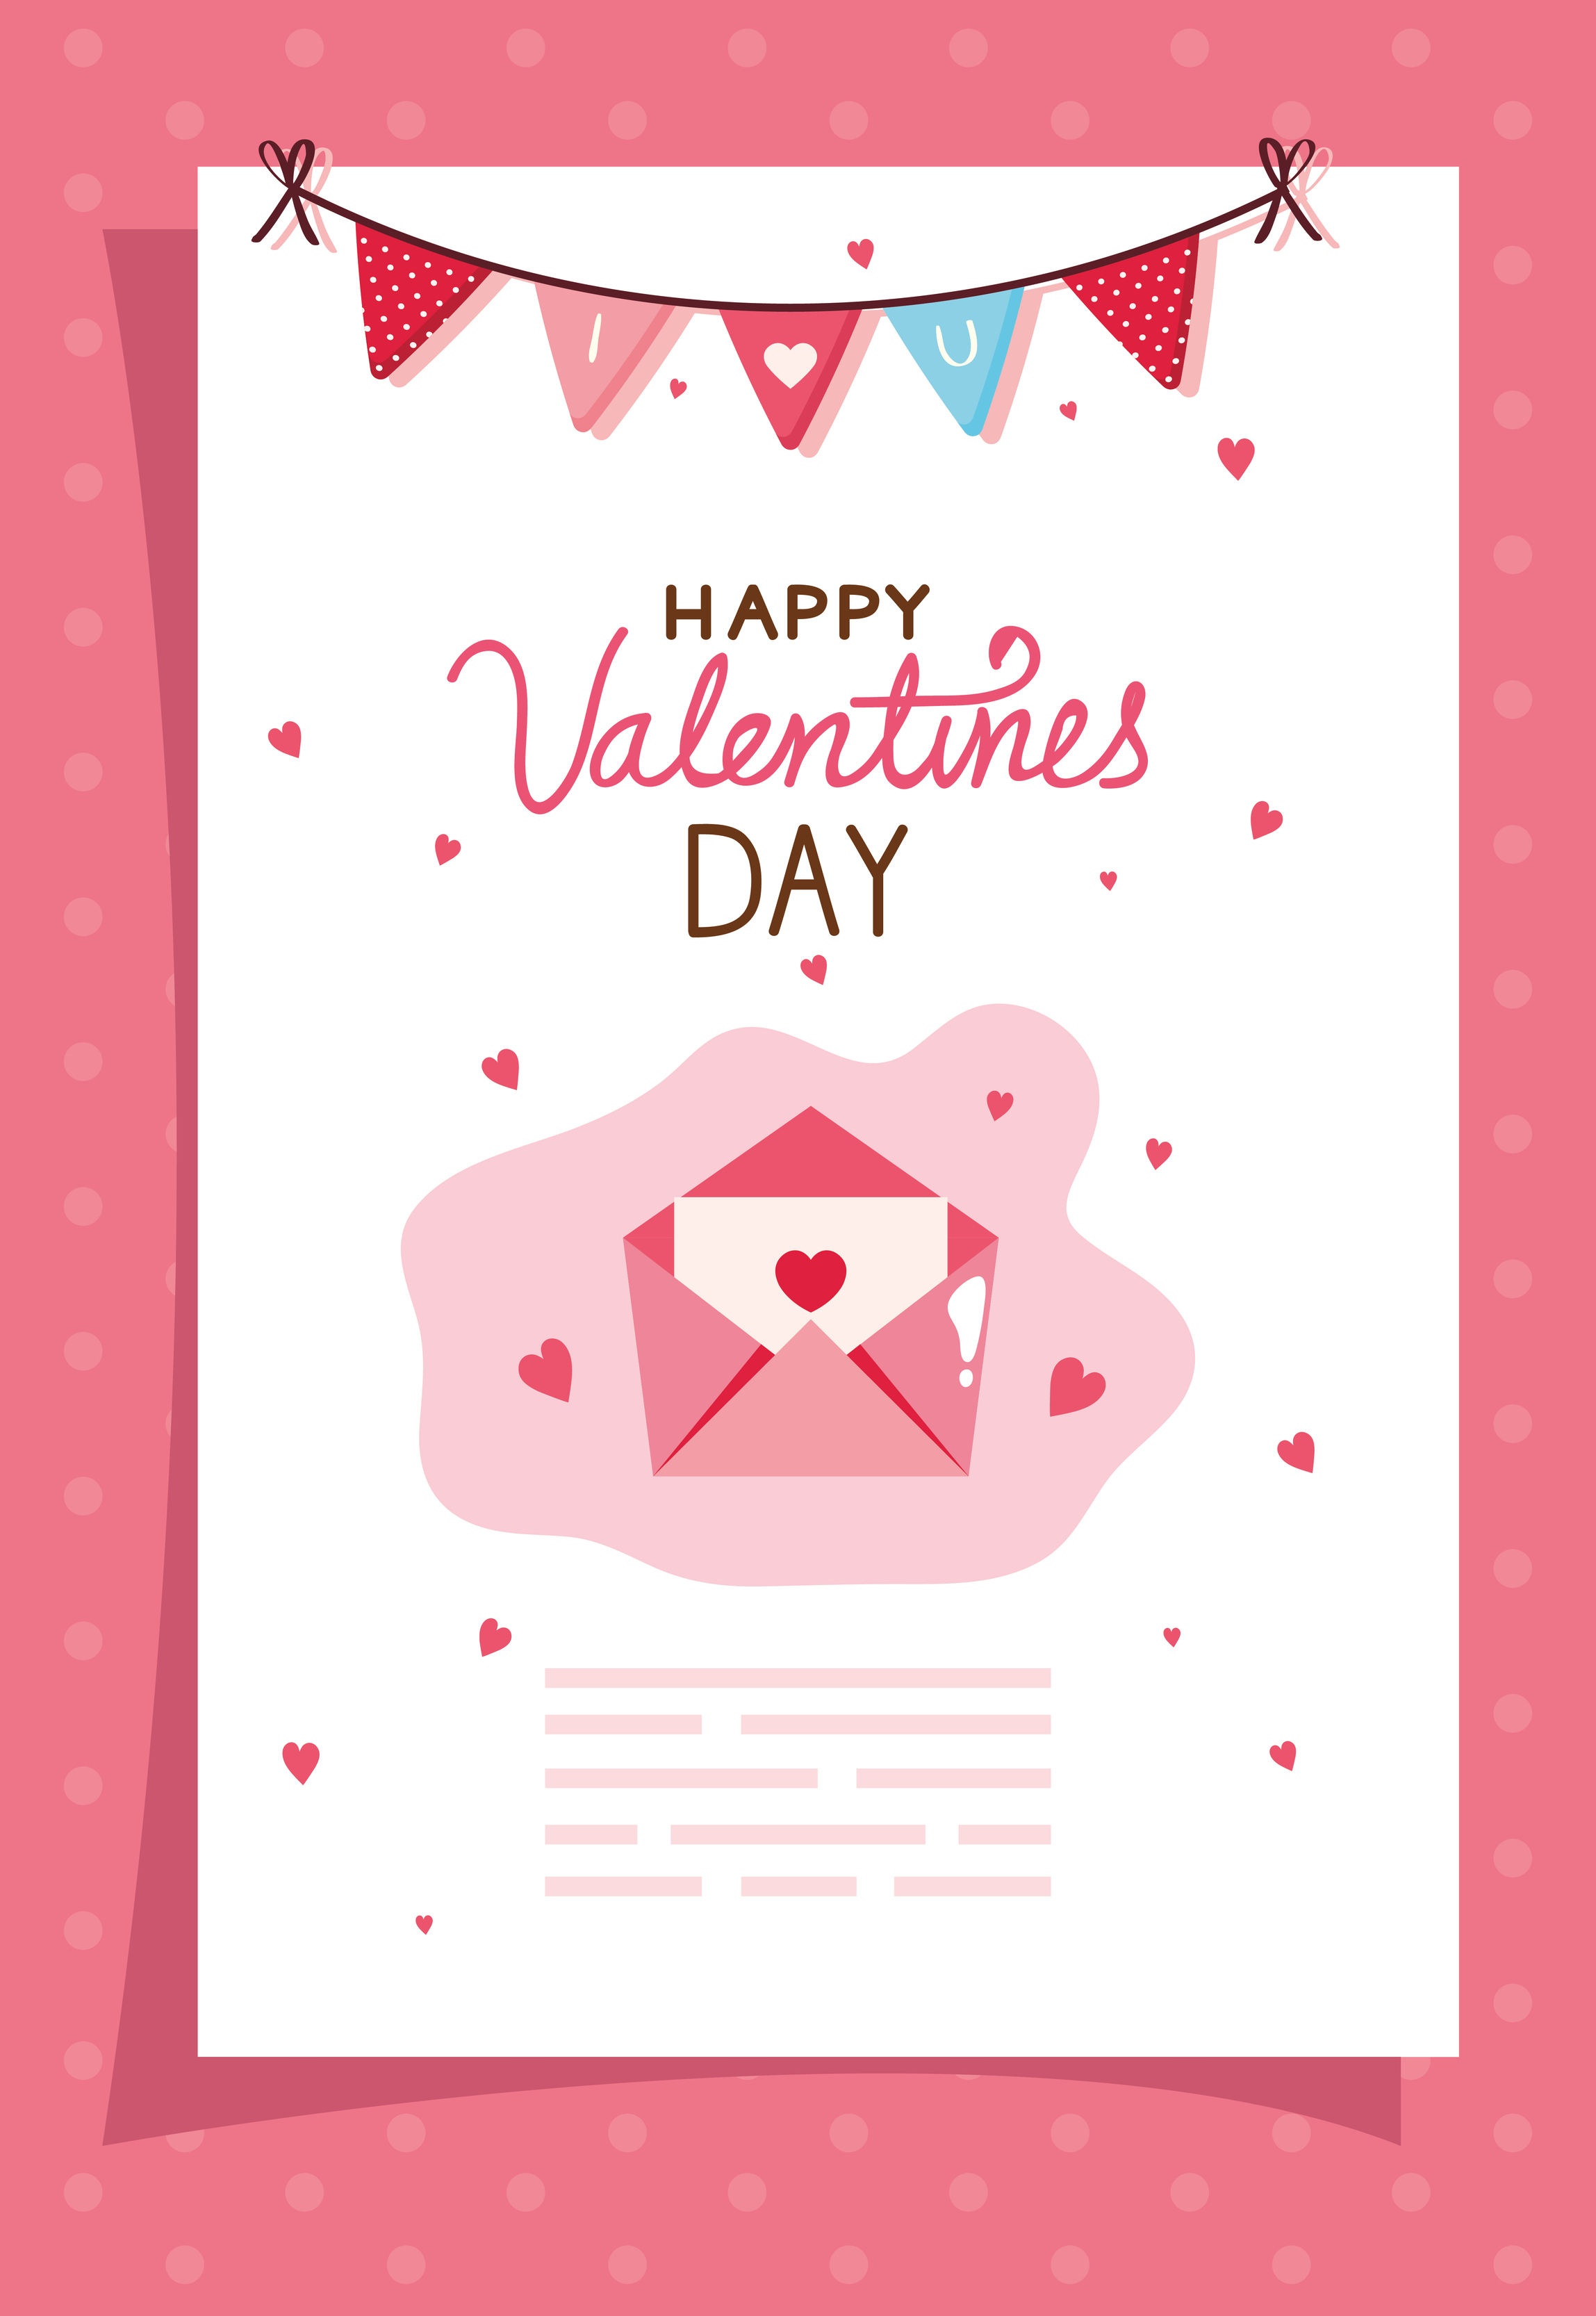 Valentines Day Card Template With Elegant Decorations On Pink Background  With Copy Space Flat Lay Top View Happy Valentines Day Banner Greeting Card  Mockup Love And Romance Concept Stock Photo - Download